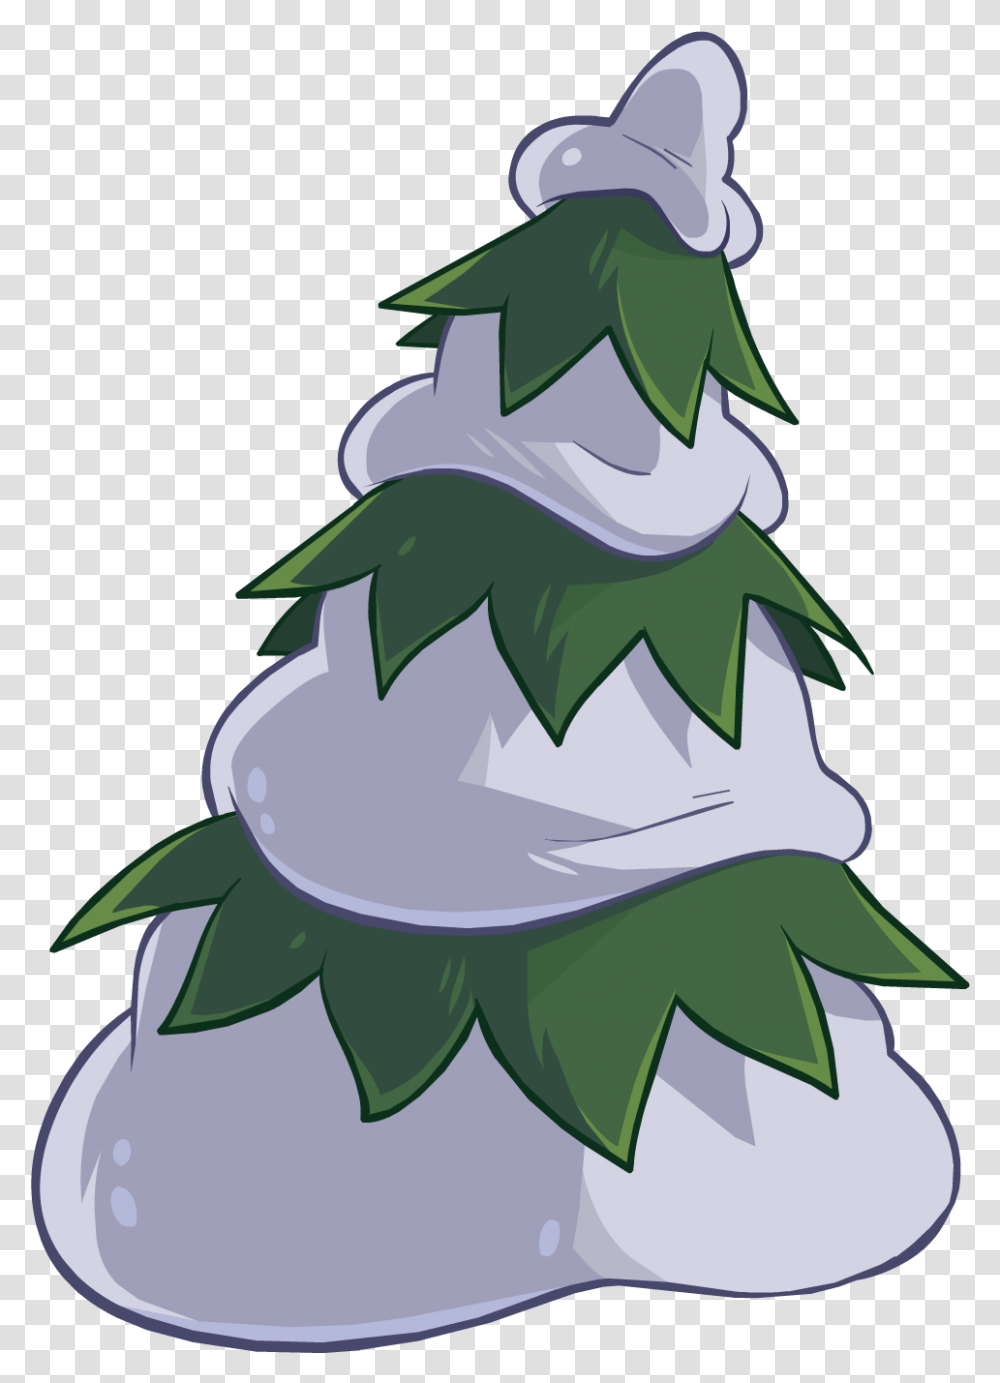 January Clipart Snowtree Free Club Penguin Tree, Plant, Green, Flower, Animal Transparent Png